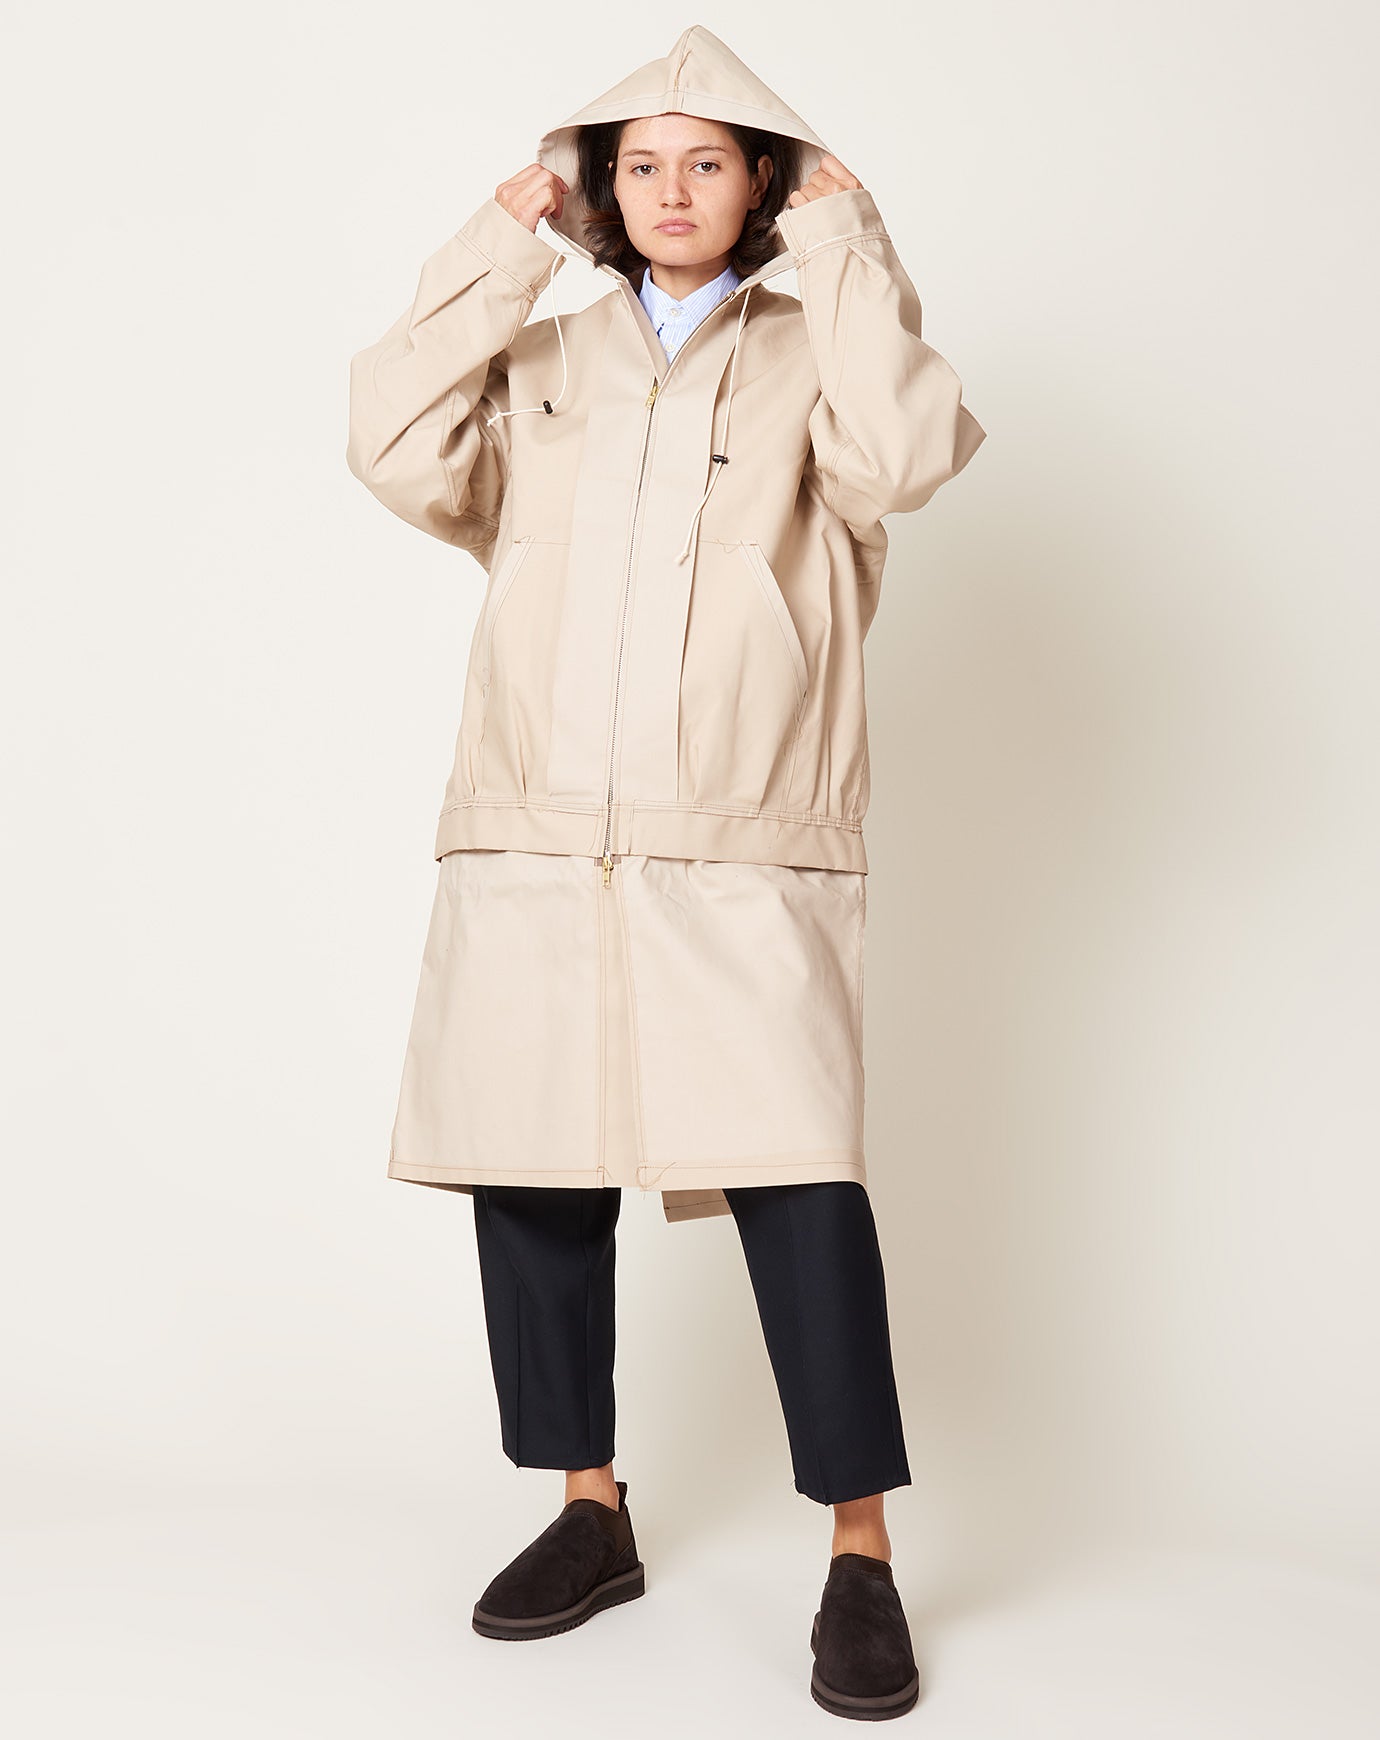 Camiel Fortgens Research Mixed Coat in Sand